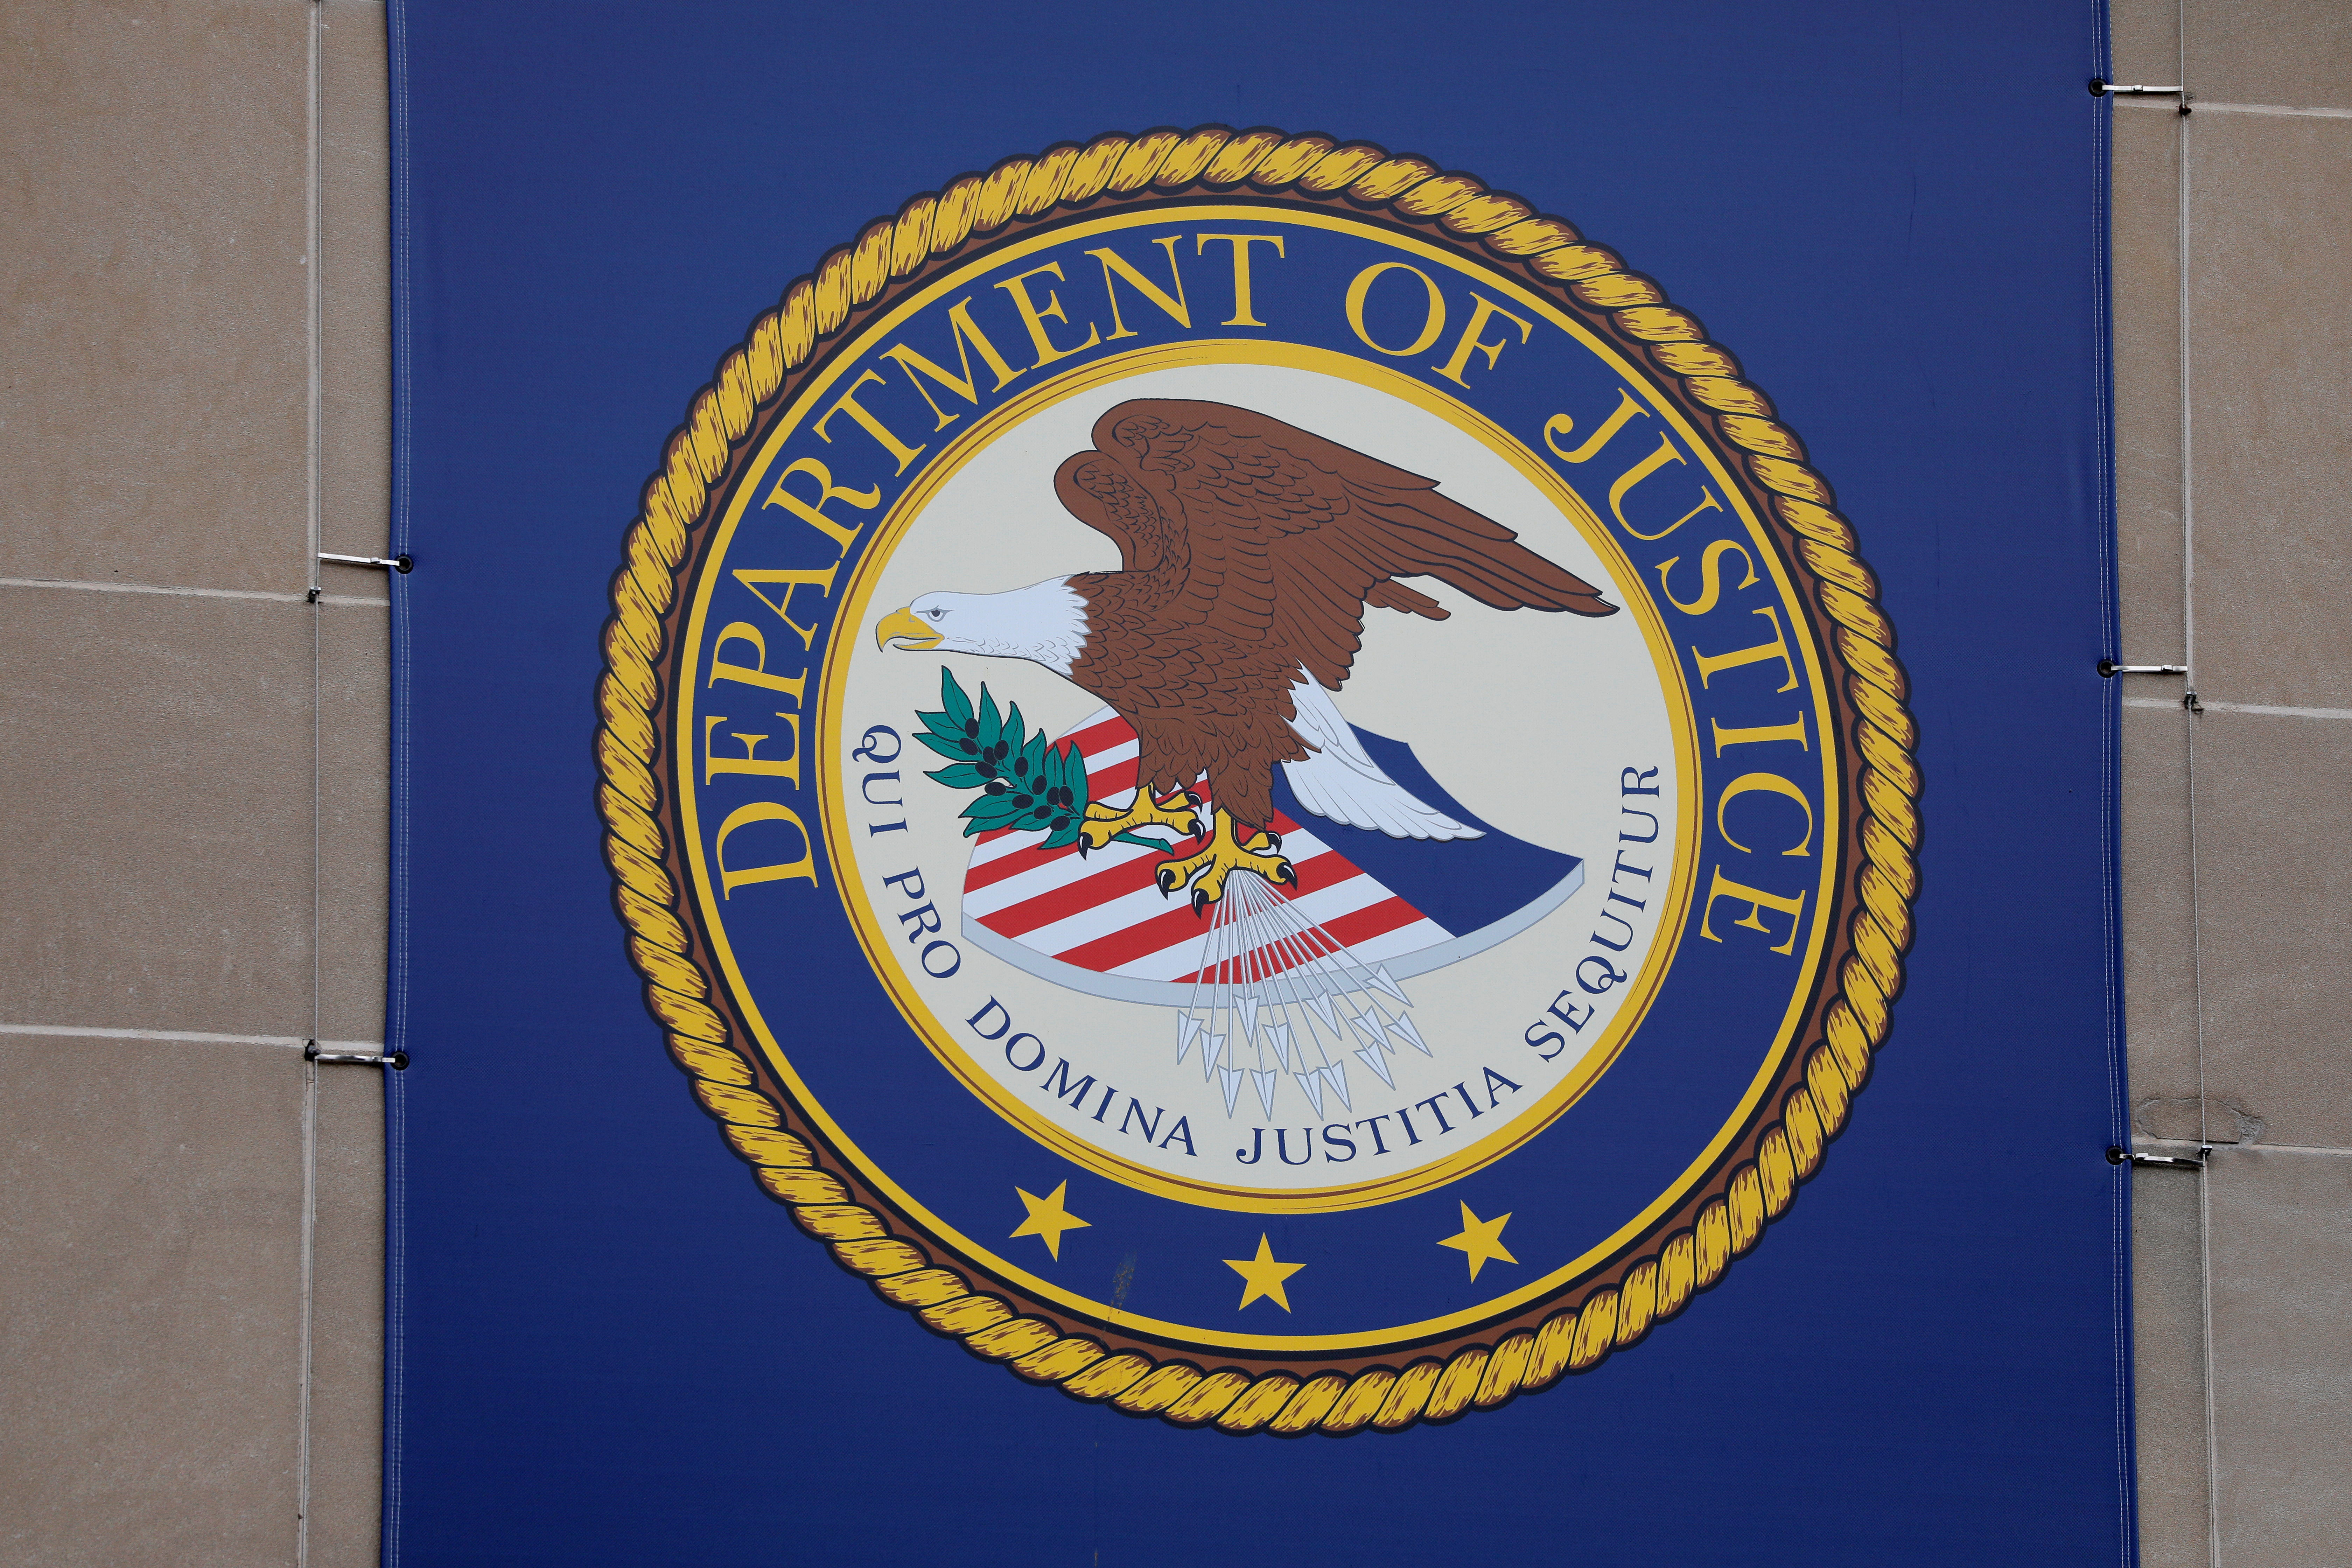 The crest of the United States Department of Justice (DOJ) is seen at their headquarters in Washington, D.C., U.S., May 10, 2021. REUTERS/Andrew Kelly